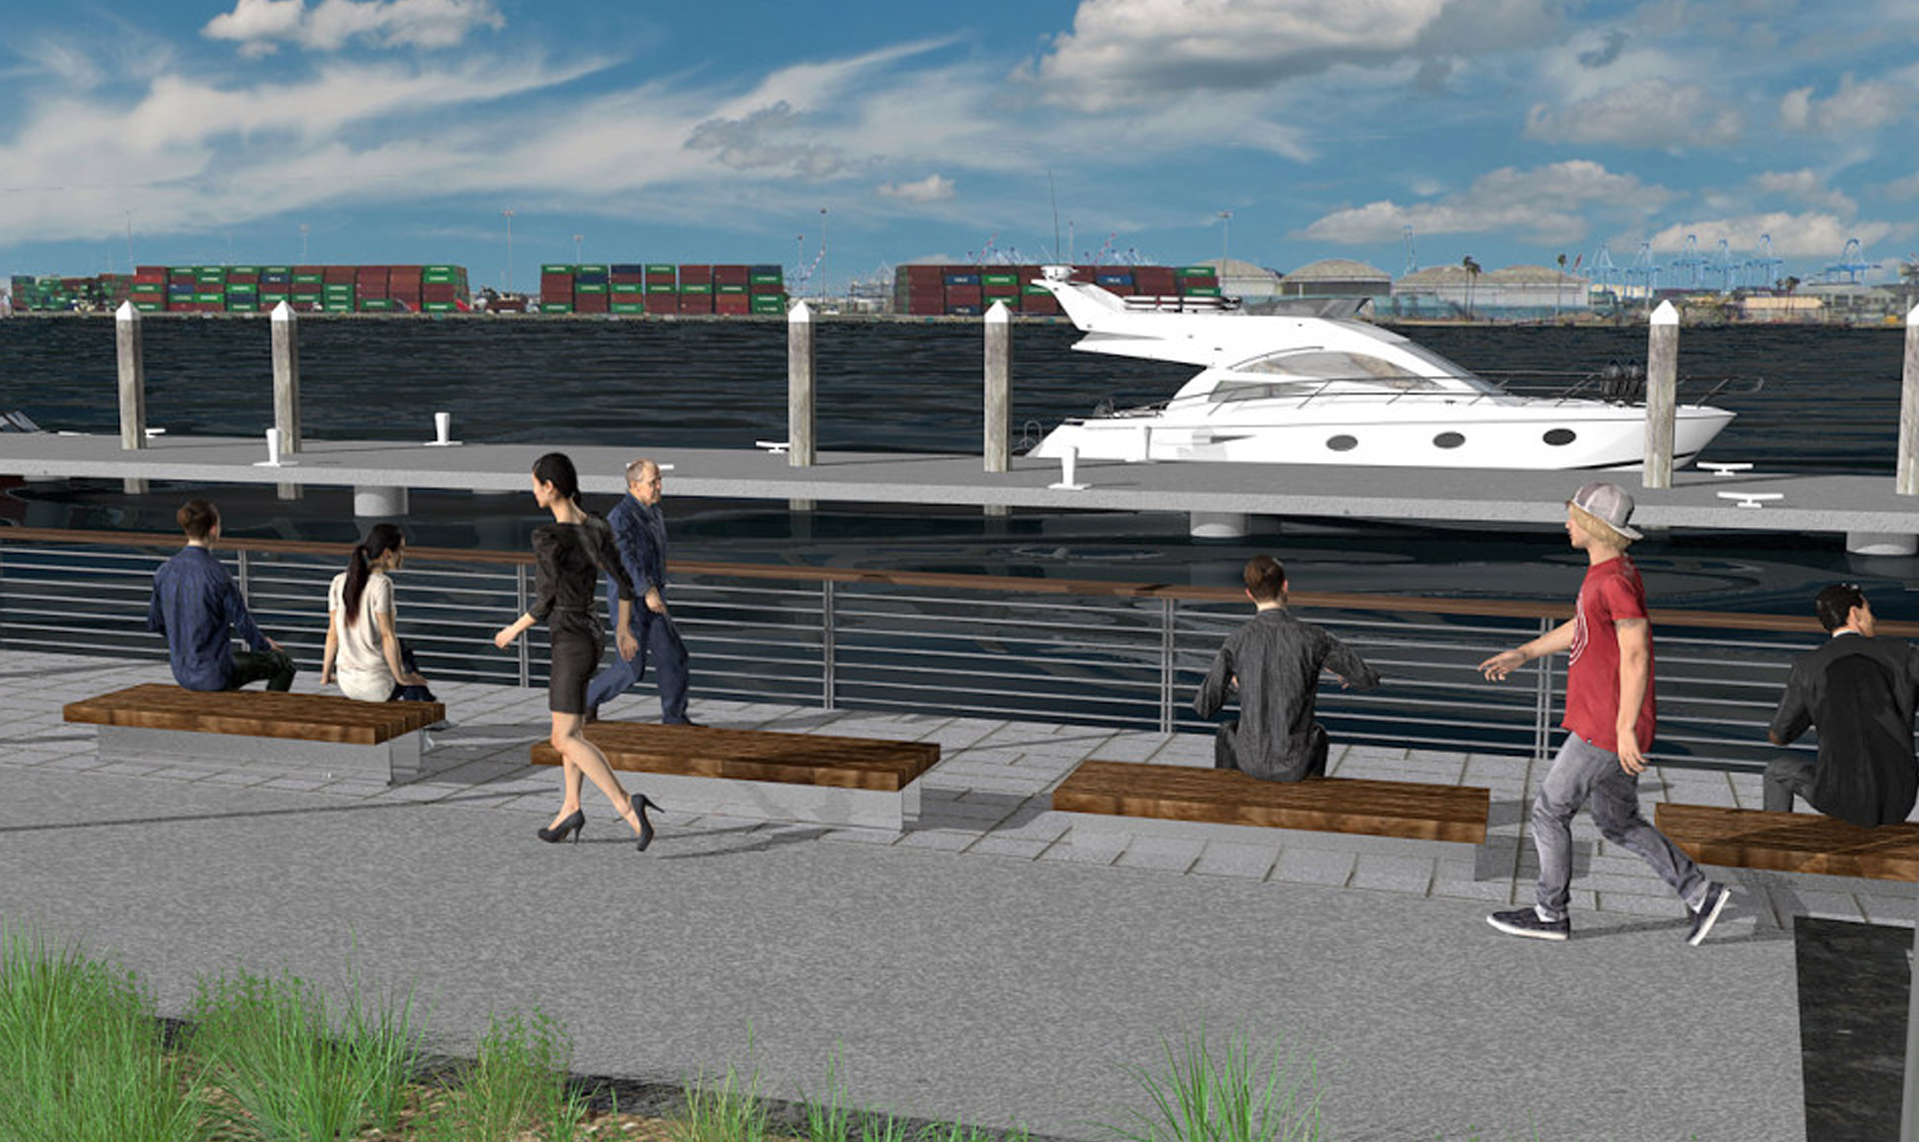 Construction delayed 6 months, but waterfront is still on deck for big changes